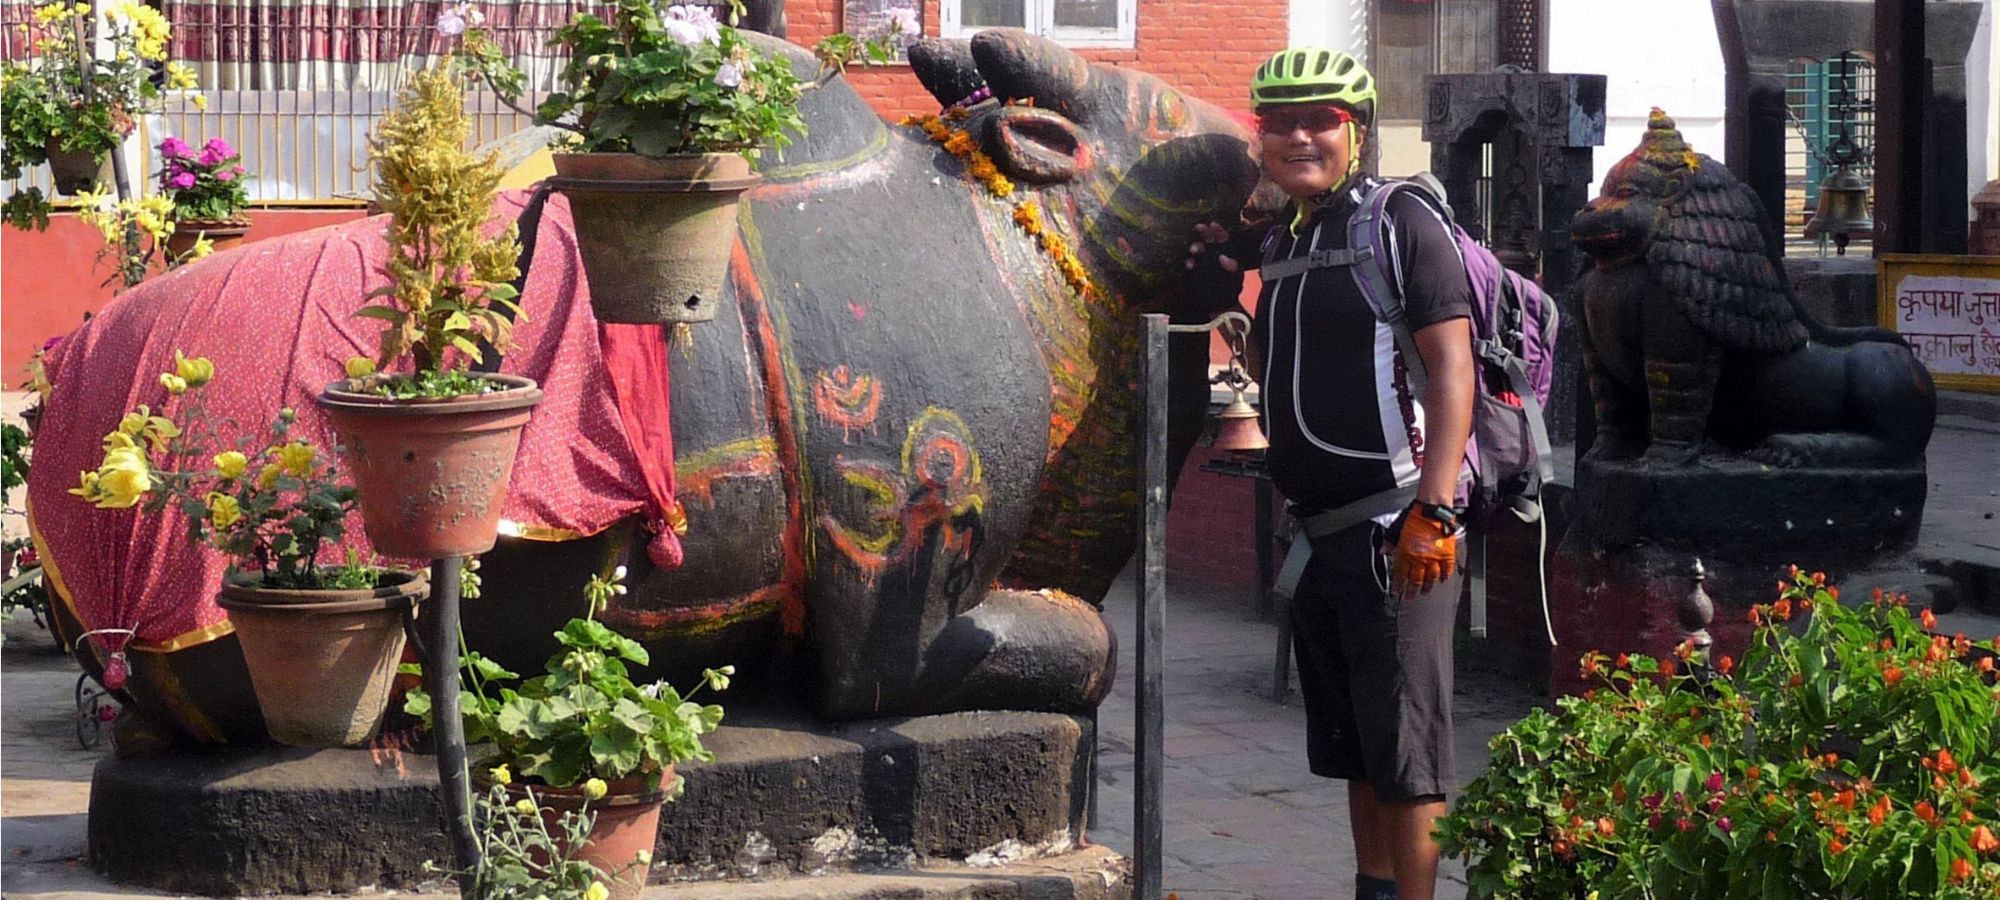 Photos from our Nepal Cycling Holiday